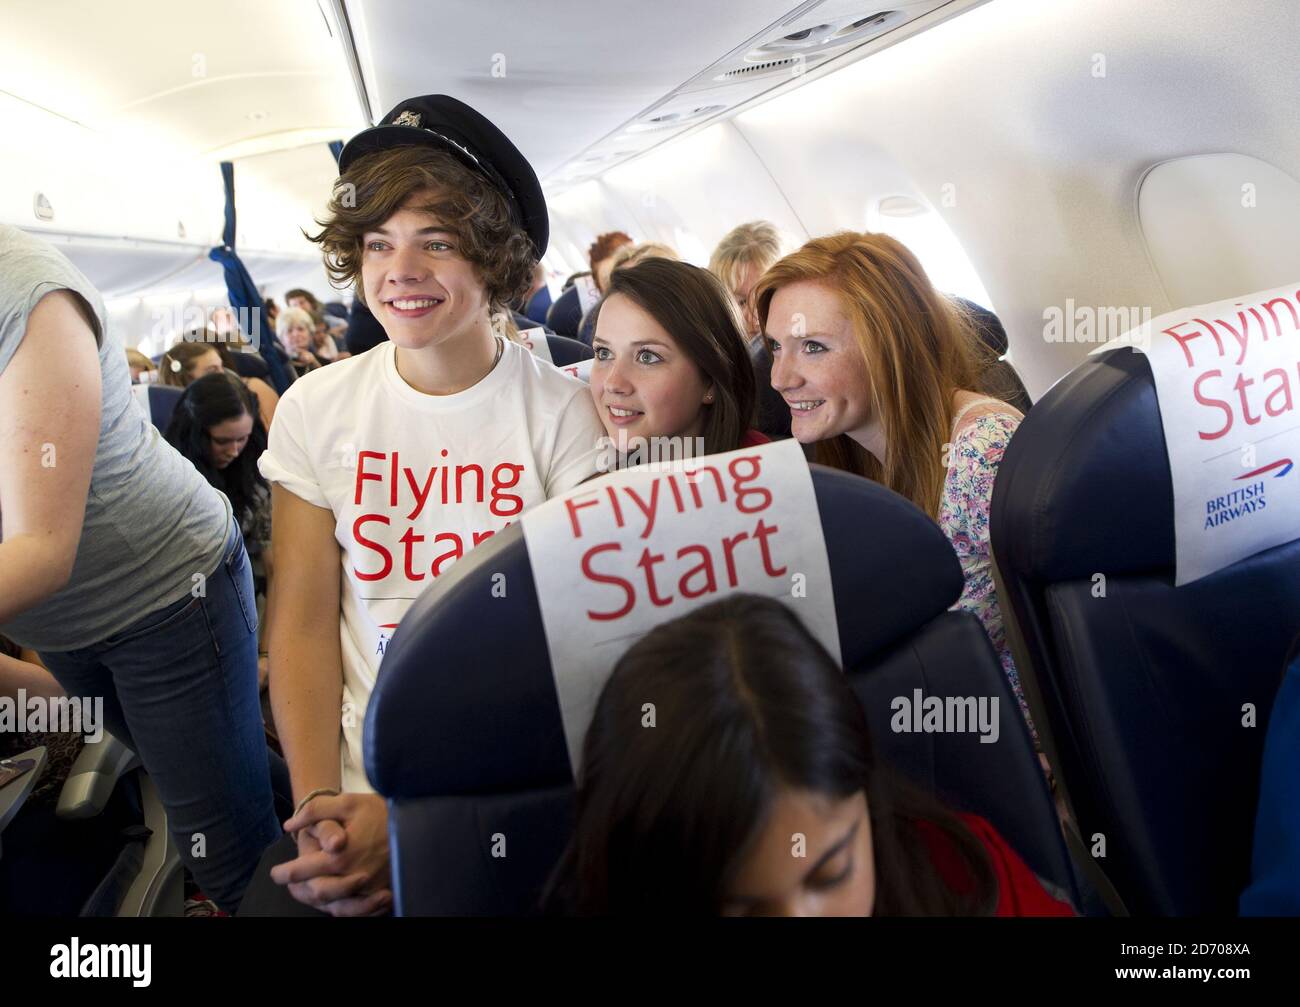 Harry Styles Of One Direction On Board Flight Ba1d A Private Charter Flight From London To Manchester Hosted By The Band For Competition Winners Which Raised A 50 000 For Flying Start